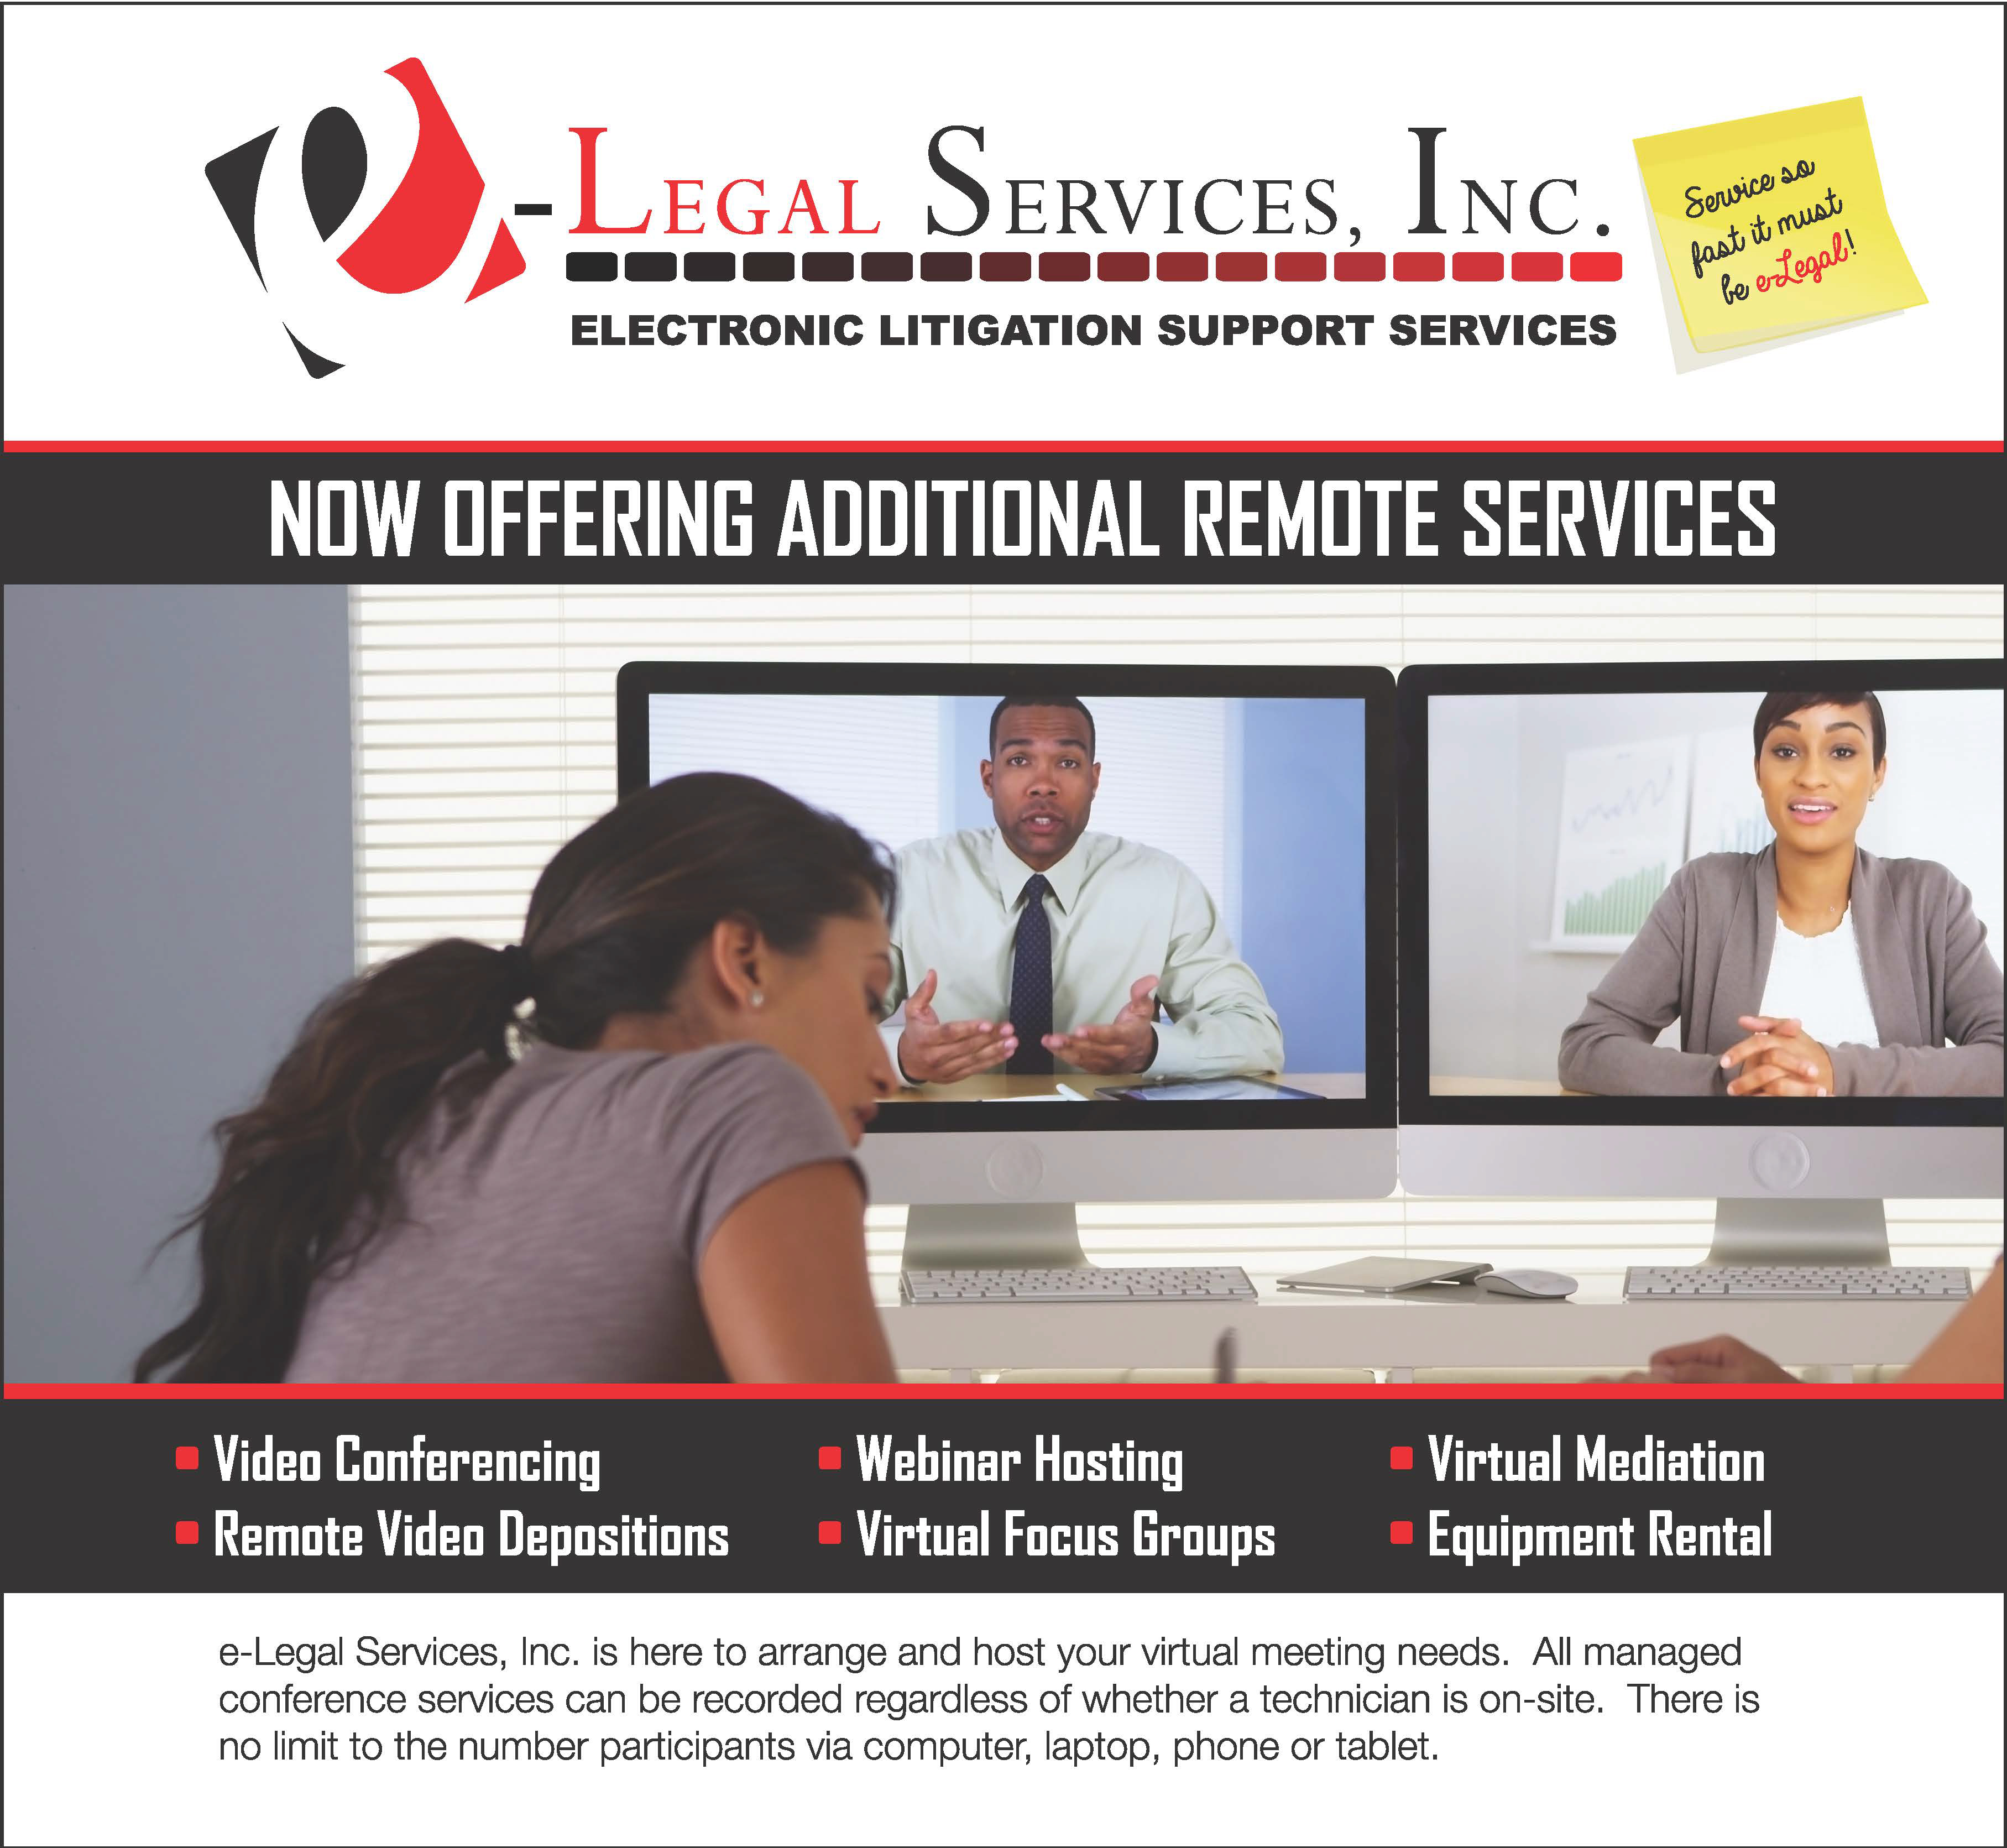 e-Legal Services, Inc. is here to arrange and host your virtual meeting needs. All managed conference services can be recorded regardless of whether a technician is on-site. There is no limit to the number participants via computer, laptop, phone or tablet.